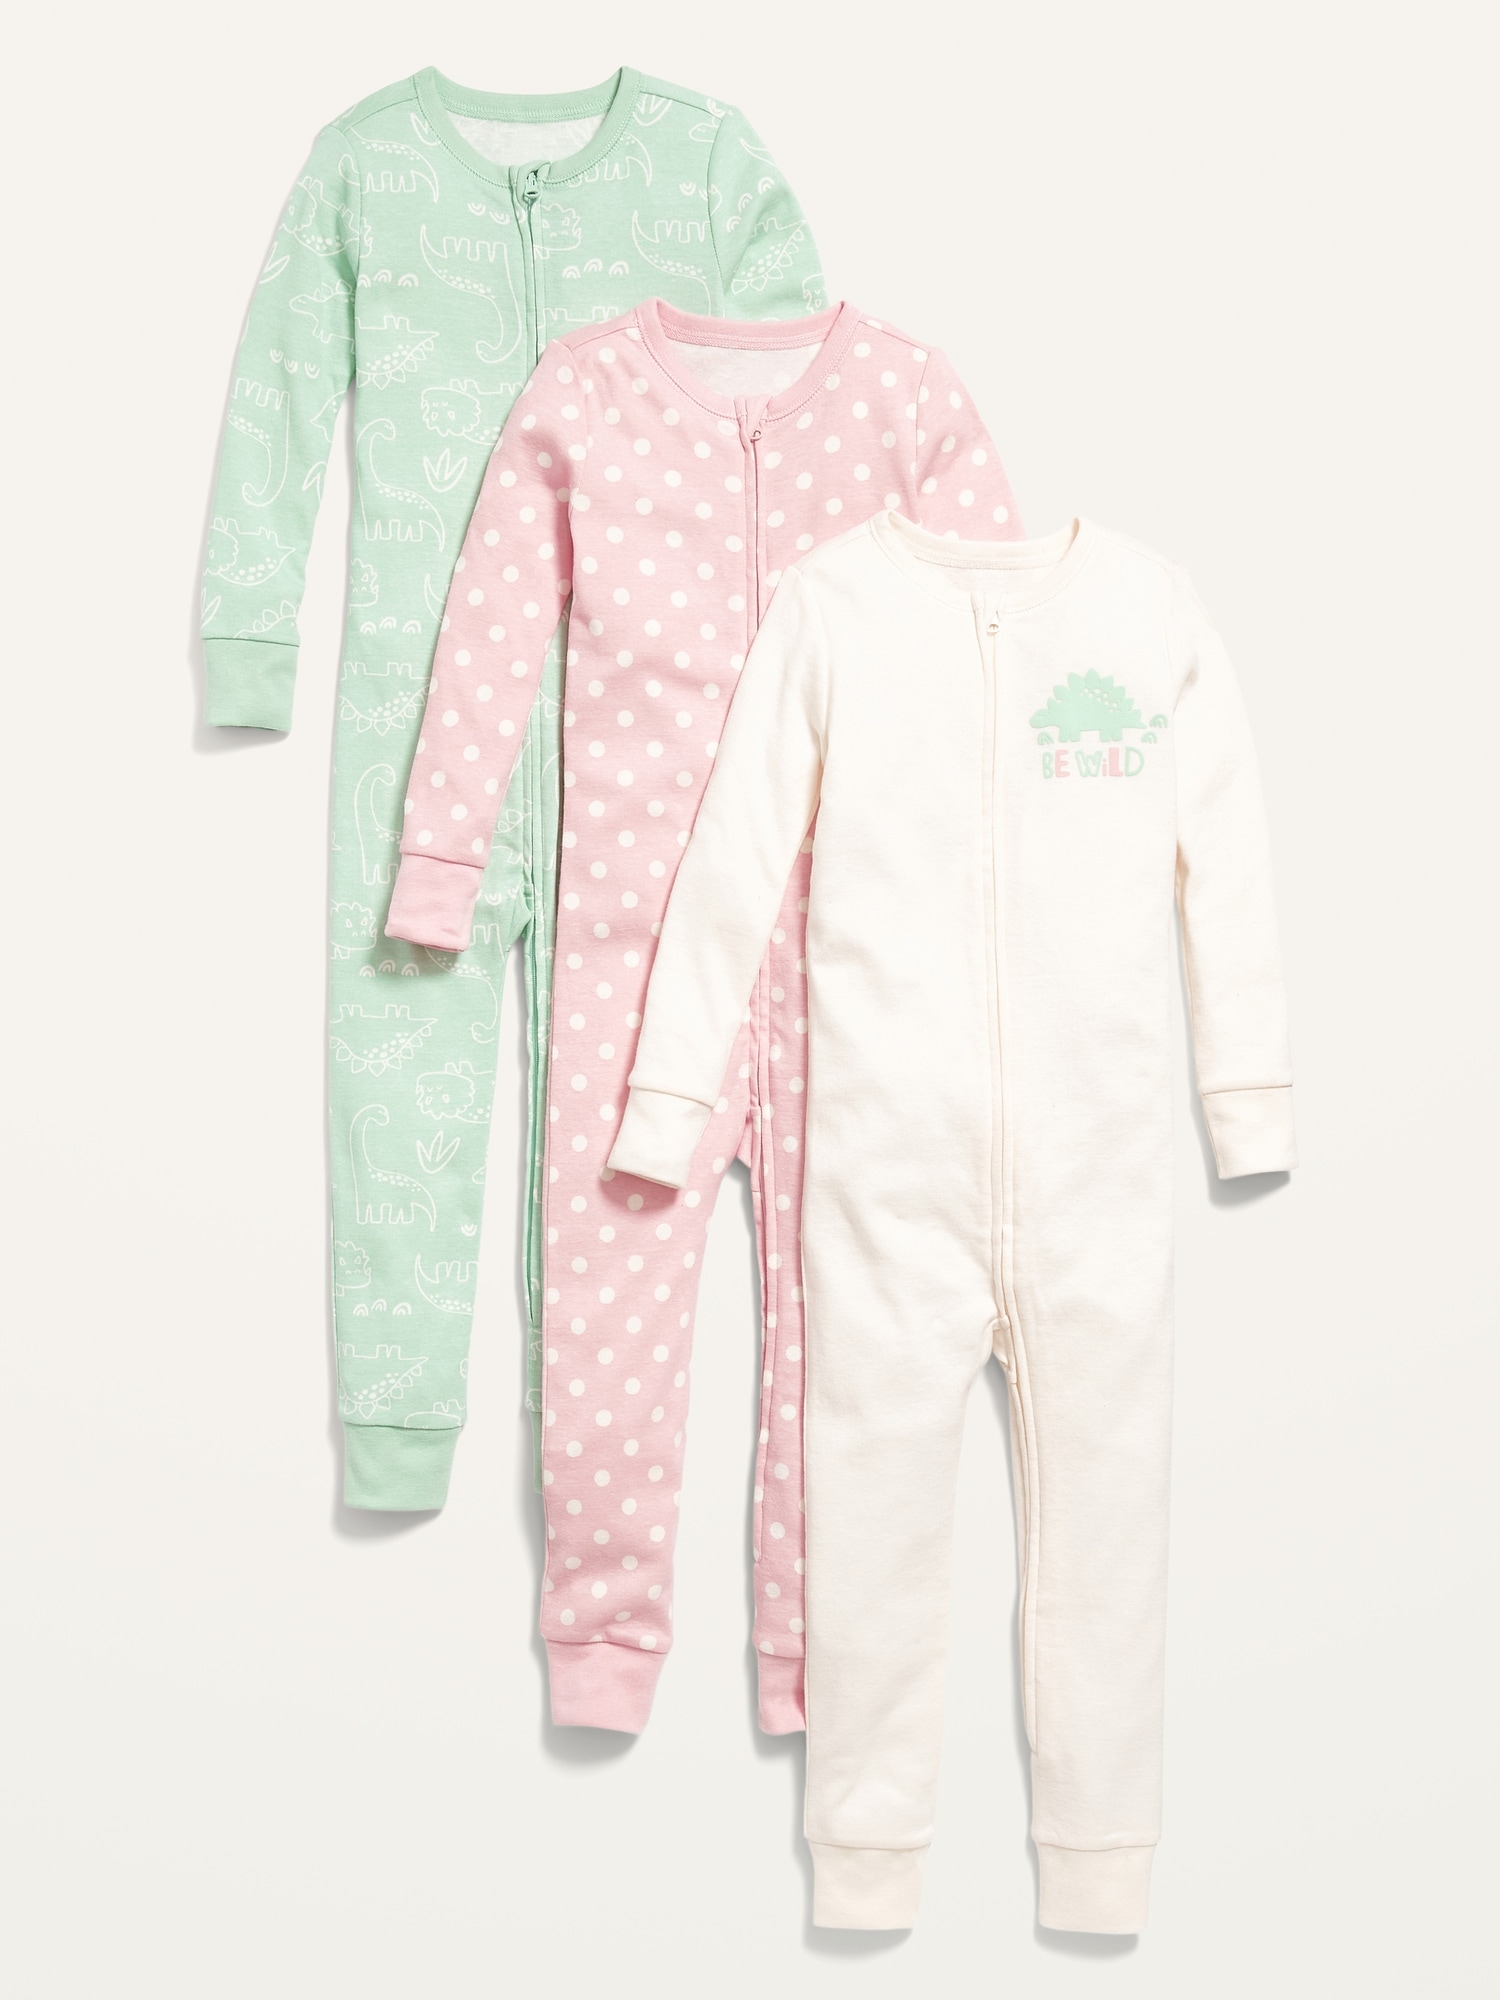 Unisex 1-Way-Zip One-Piece Pajamas 3-Pack for Toddler & Baby